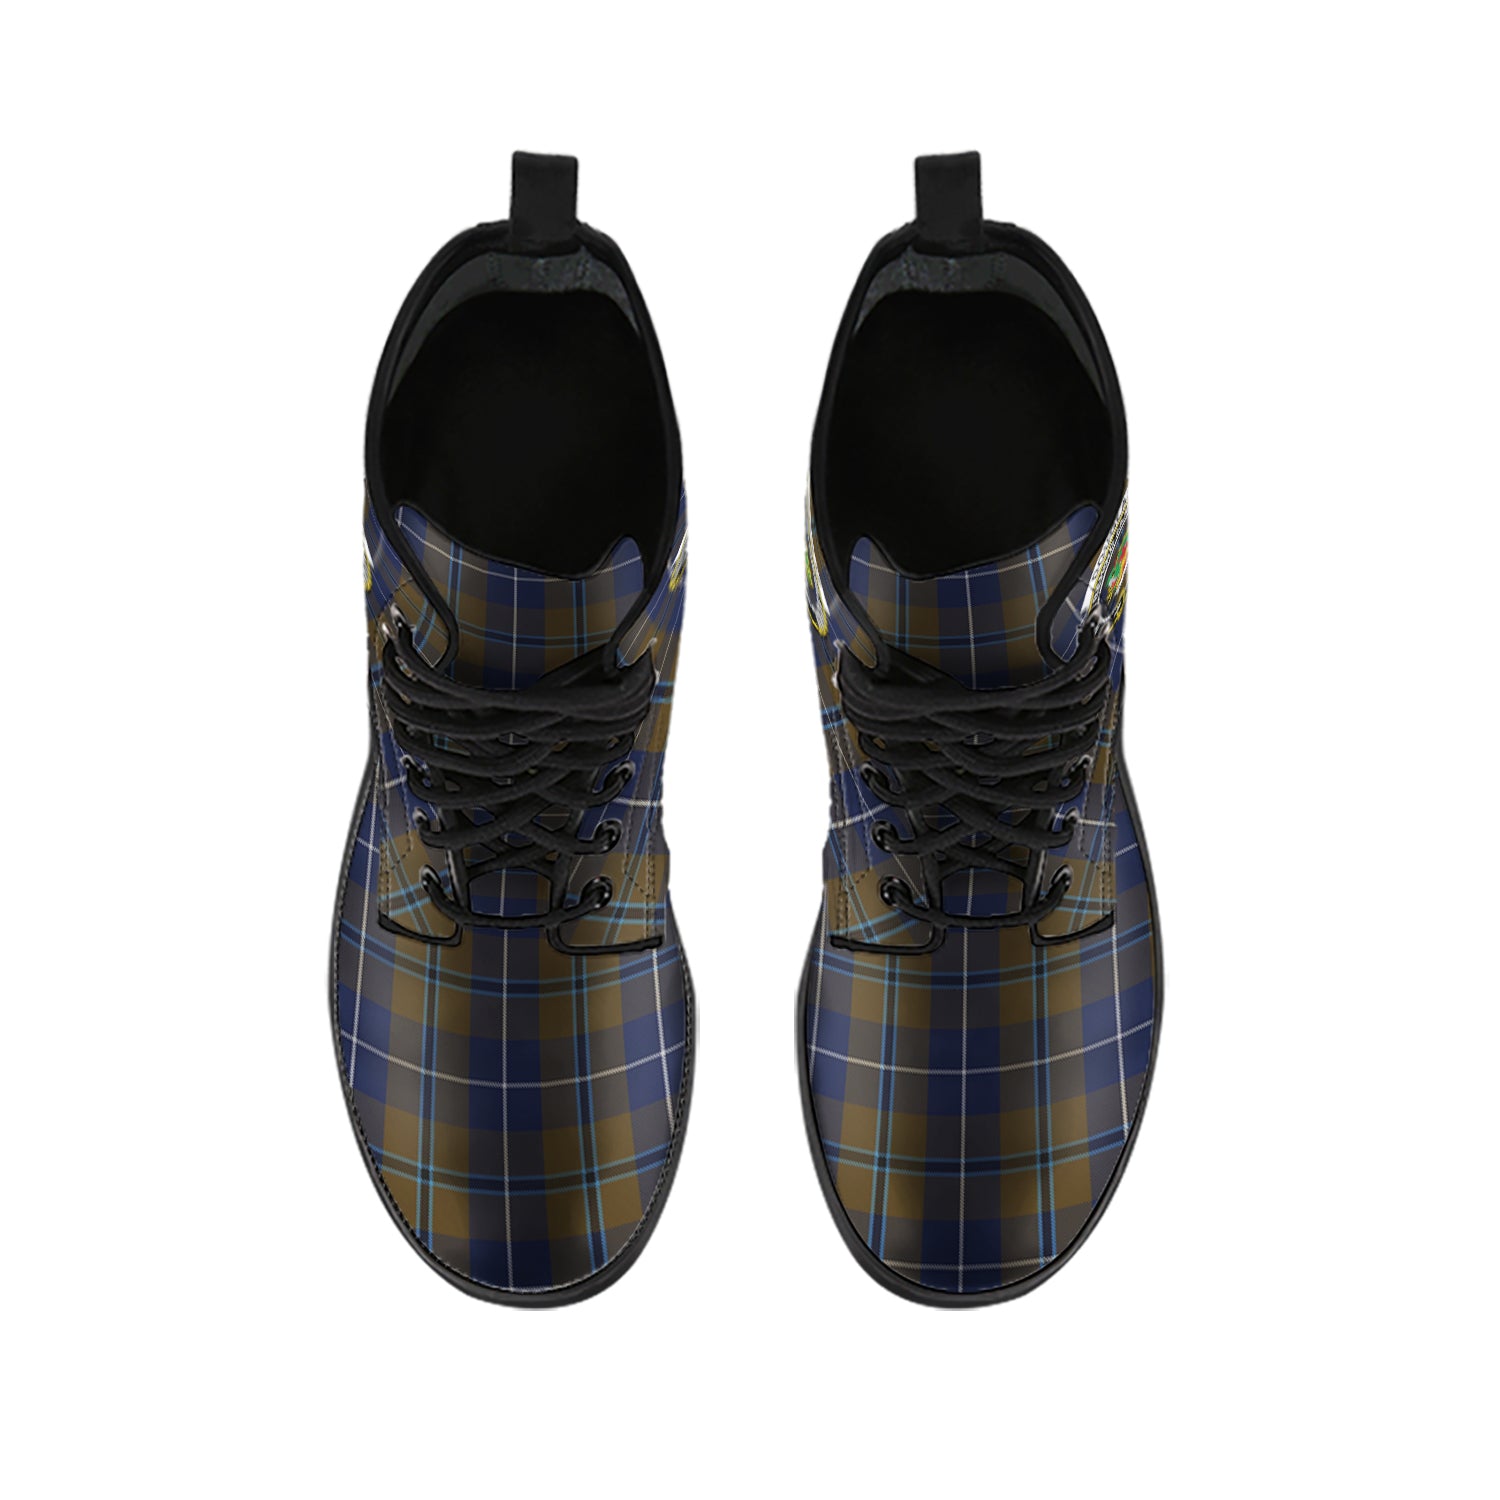 douglas-brown-tartan-leather-boots-with-family-crest